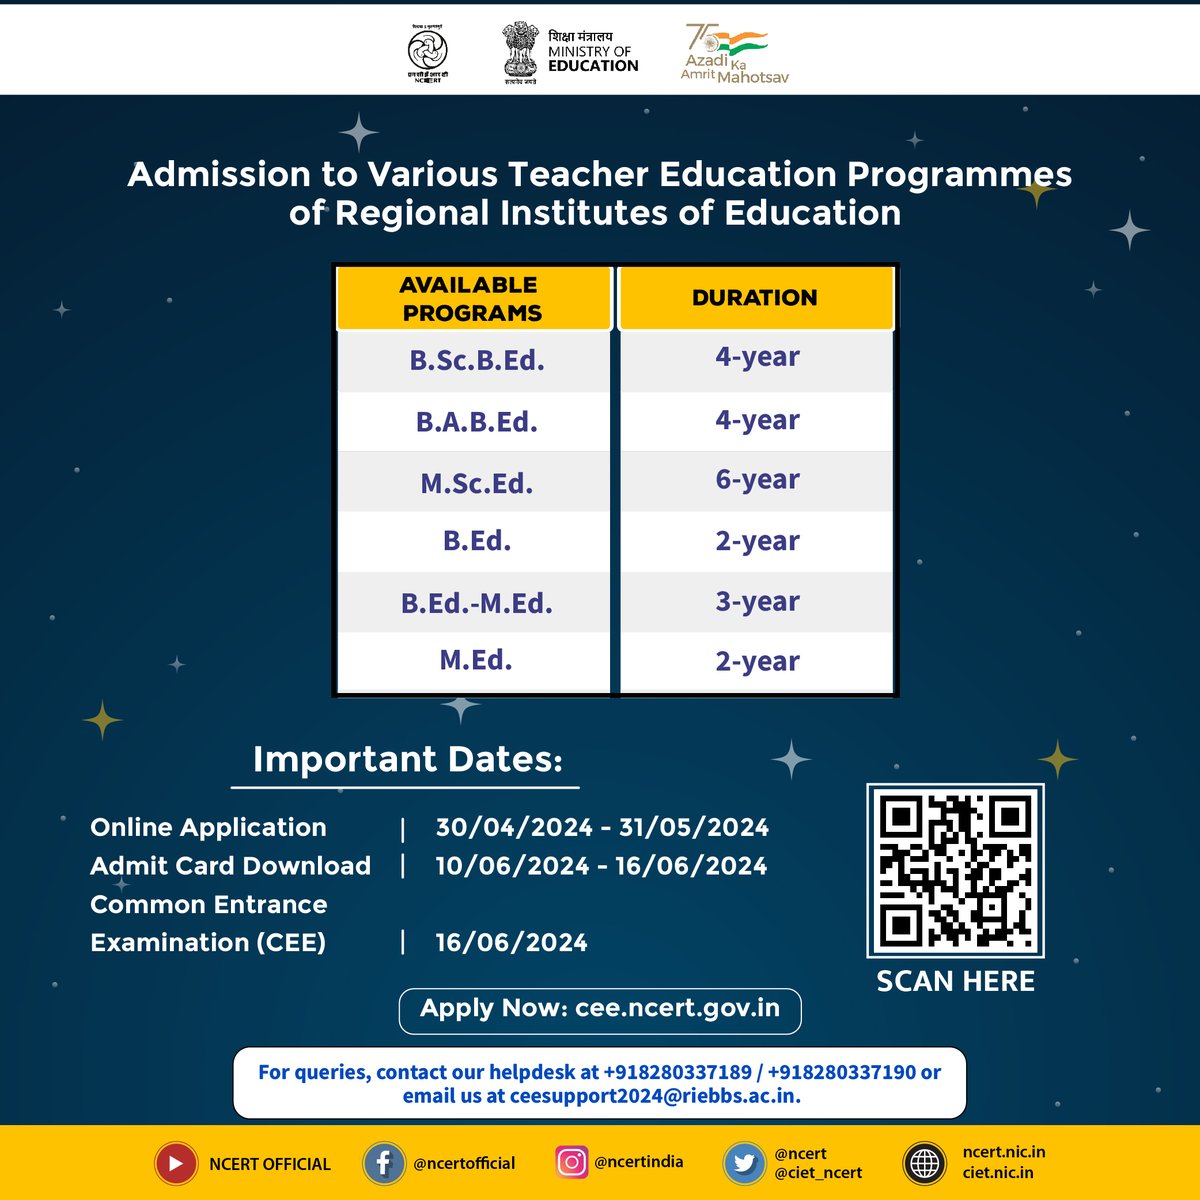 Attention Aspiring Educators! The National Council of Educational Research and Training (NCERT), New Delhi, is inviting online applications for admission to various Teacher Education Programmes at its prestigious Regional Institutes of Education (RIEs) across India:- (i) RIE,